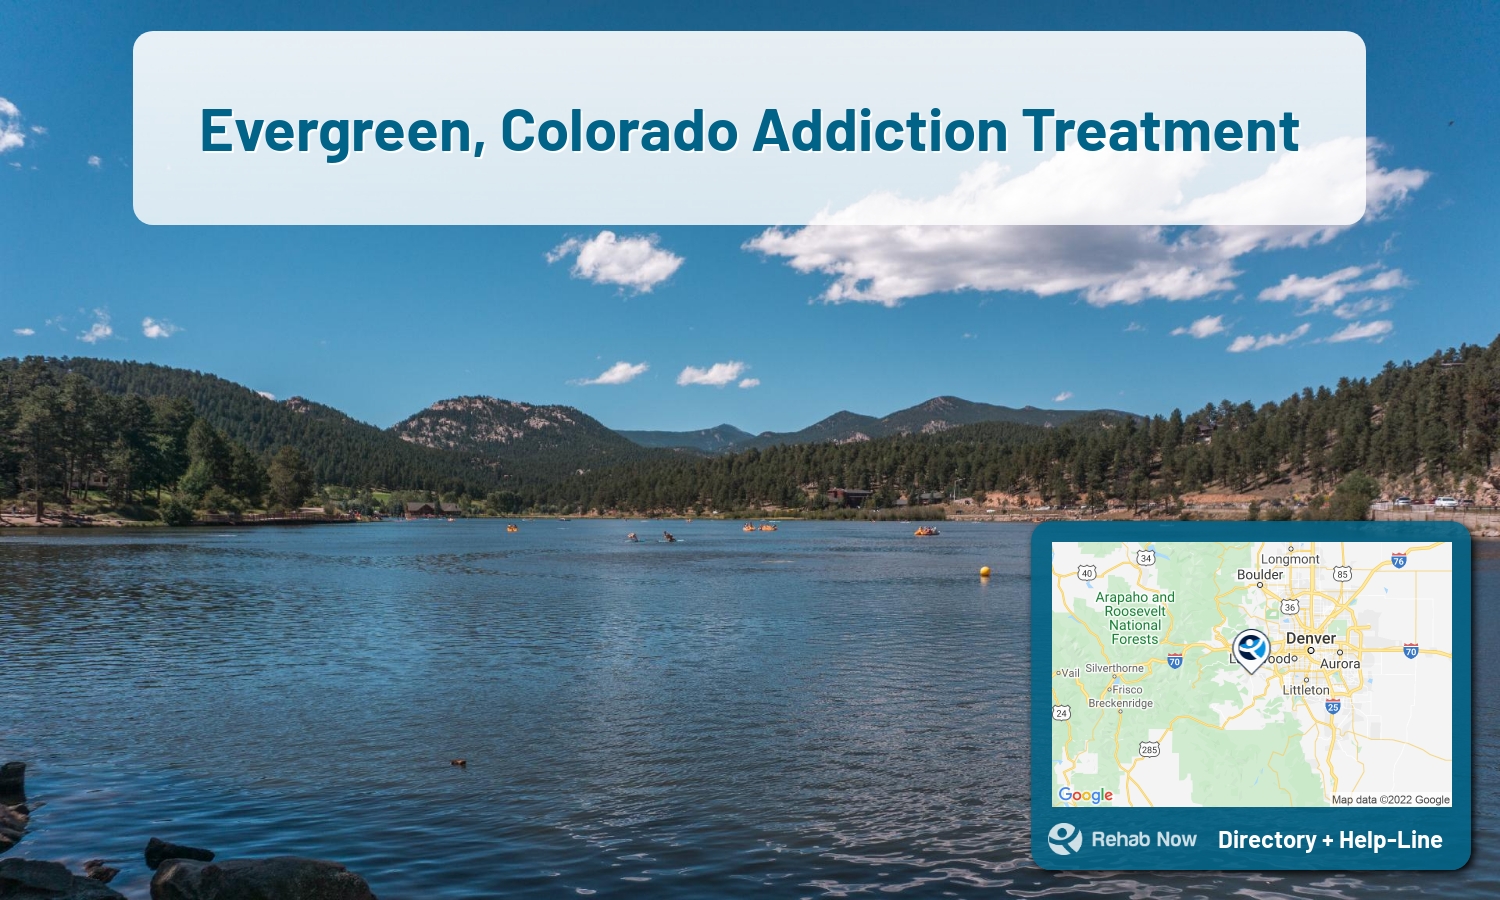 Evergreen, CO Treatment Centers. Find drug rehab in Evergreen, Colorado, or detox and treatment programs. Get the right help now!